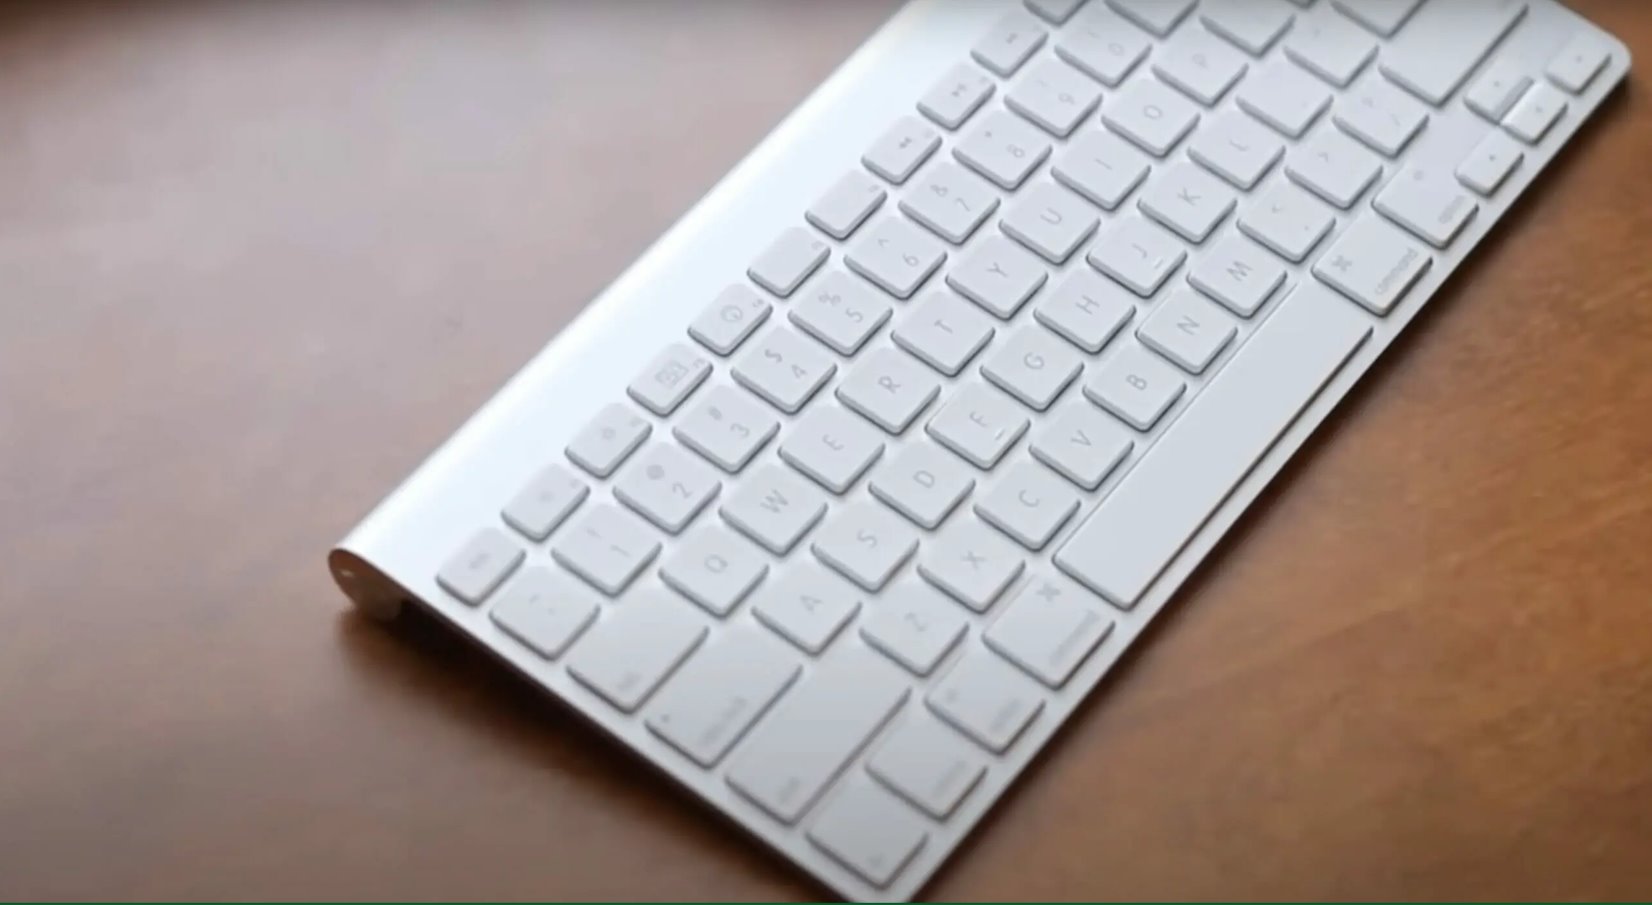 How To Make Apple Wireless Keyboard Discoverable